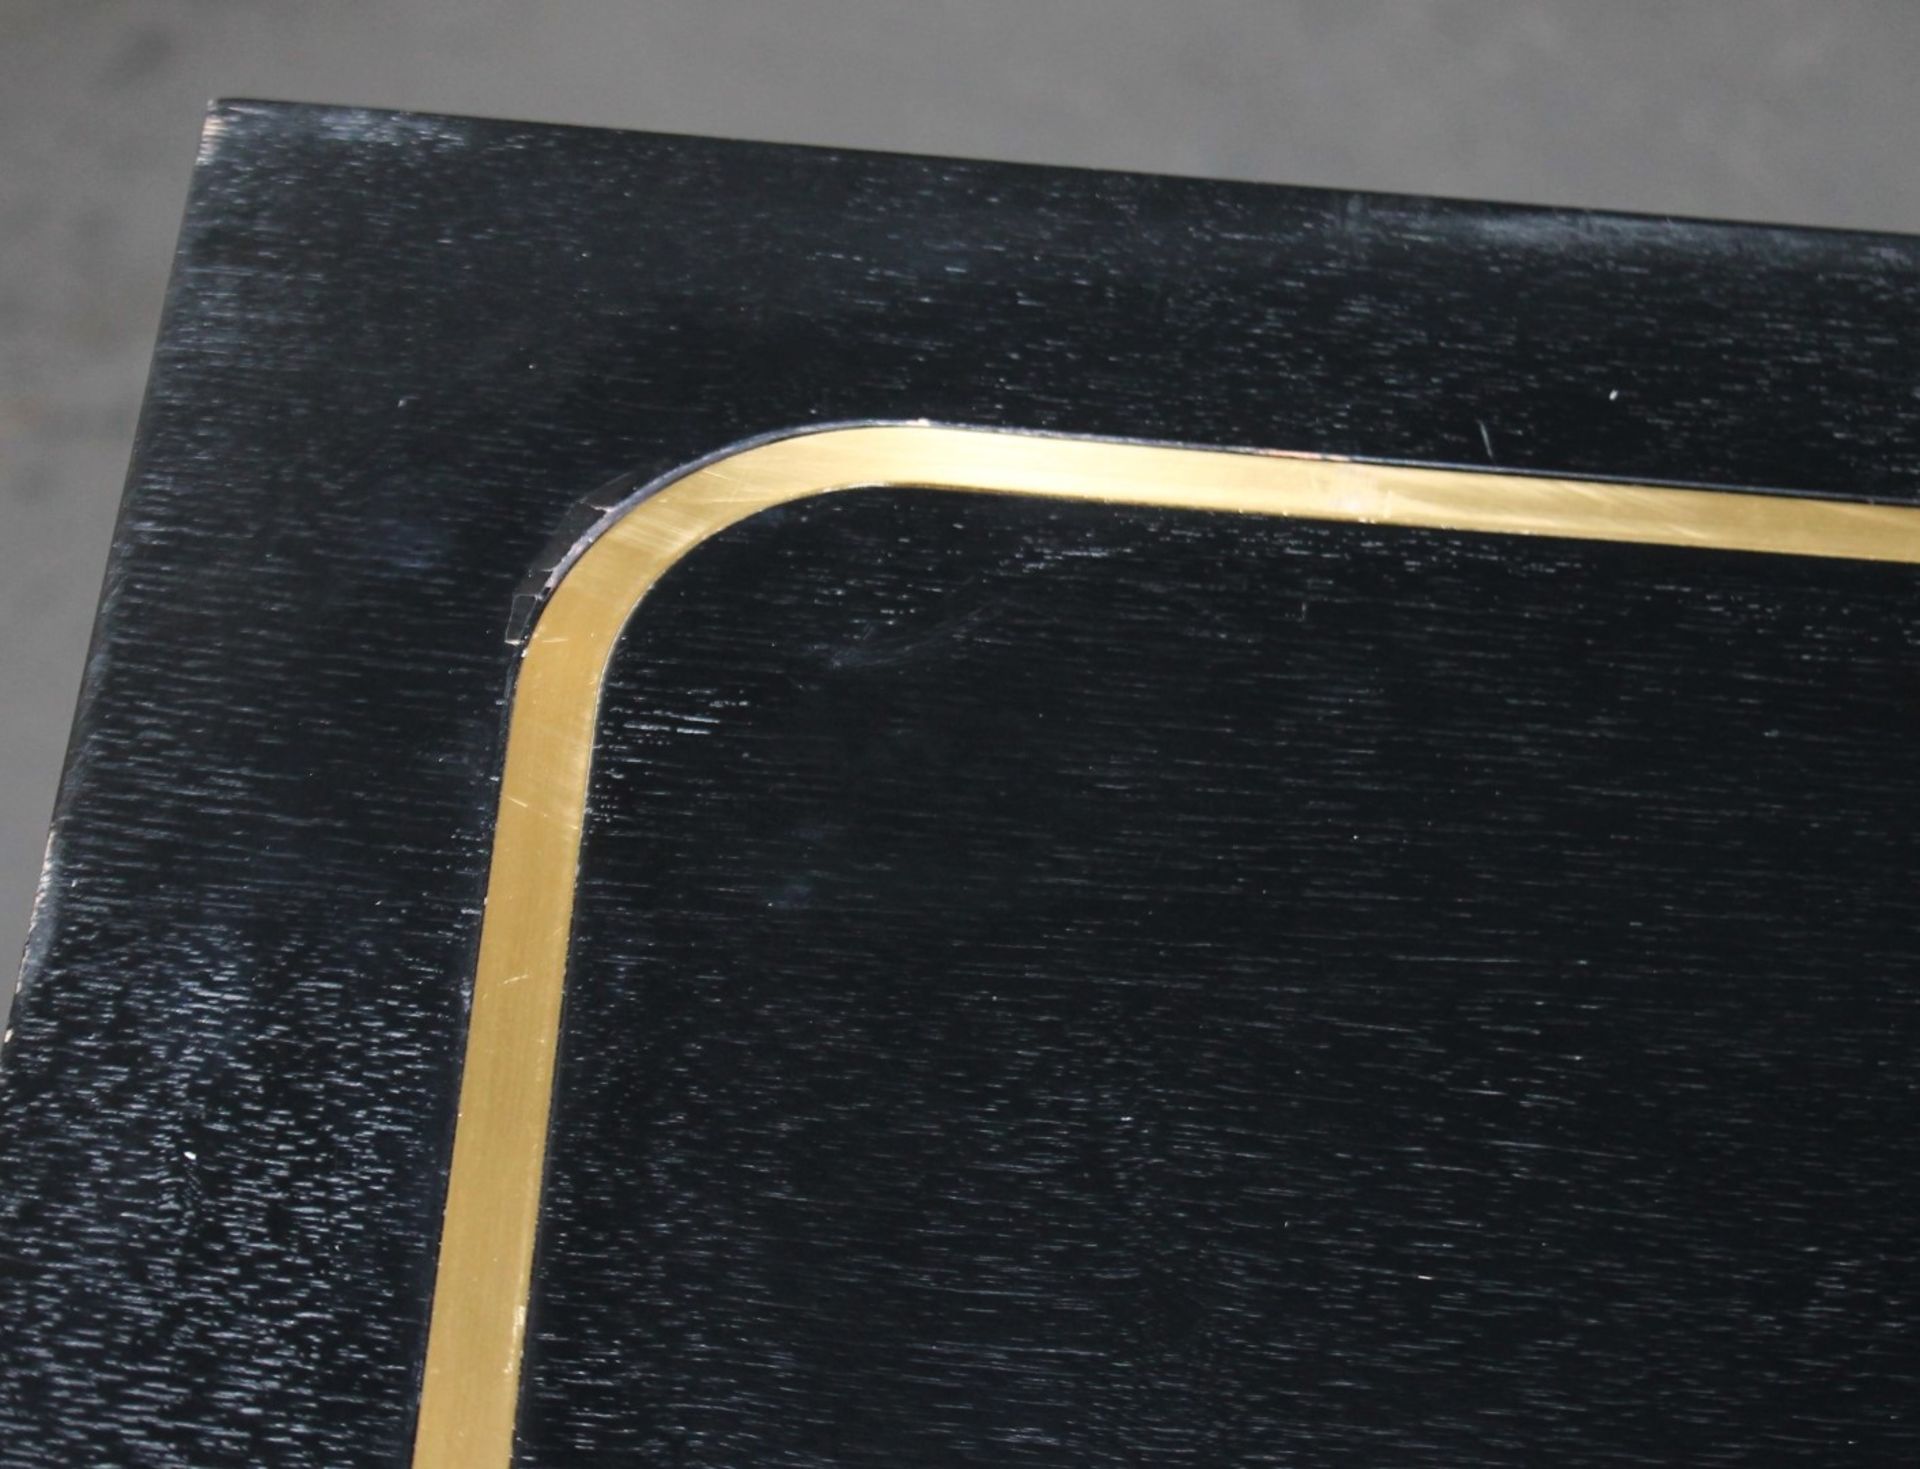 1 x Shanghai Tang Wooden Display Table In Black With Brass Inlay - Recently Removed From A World- - Image 4 of 7